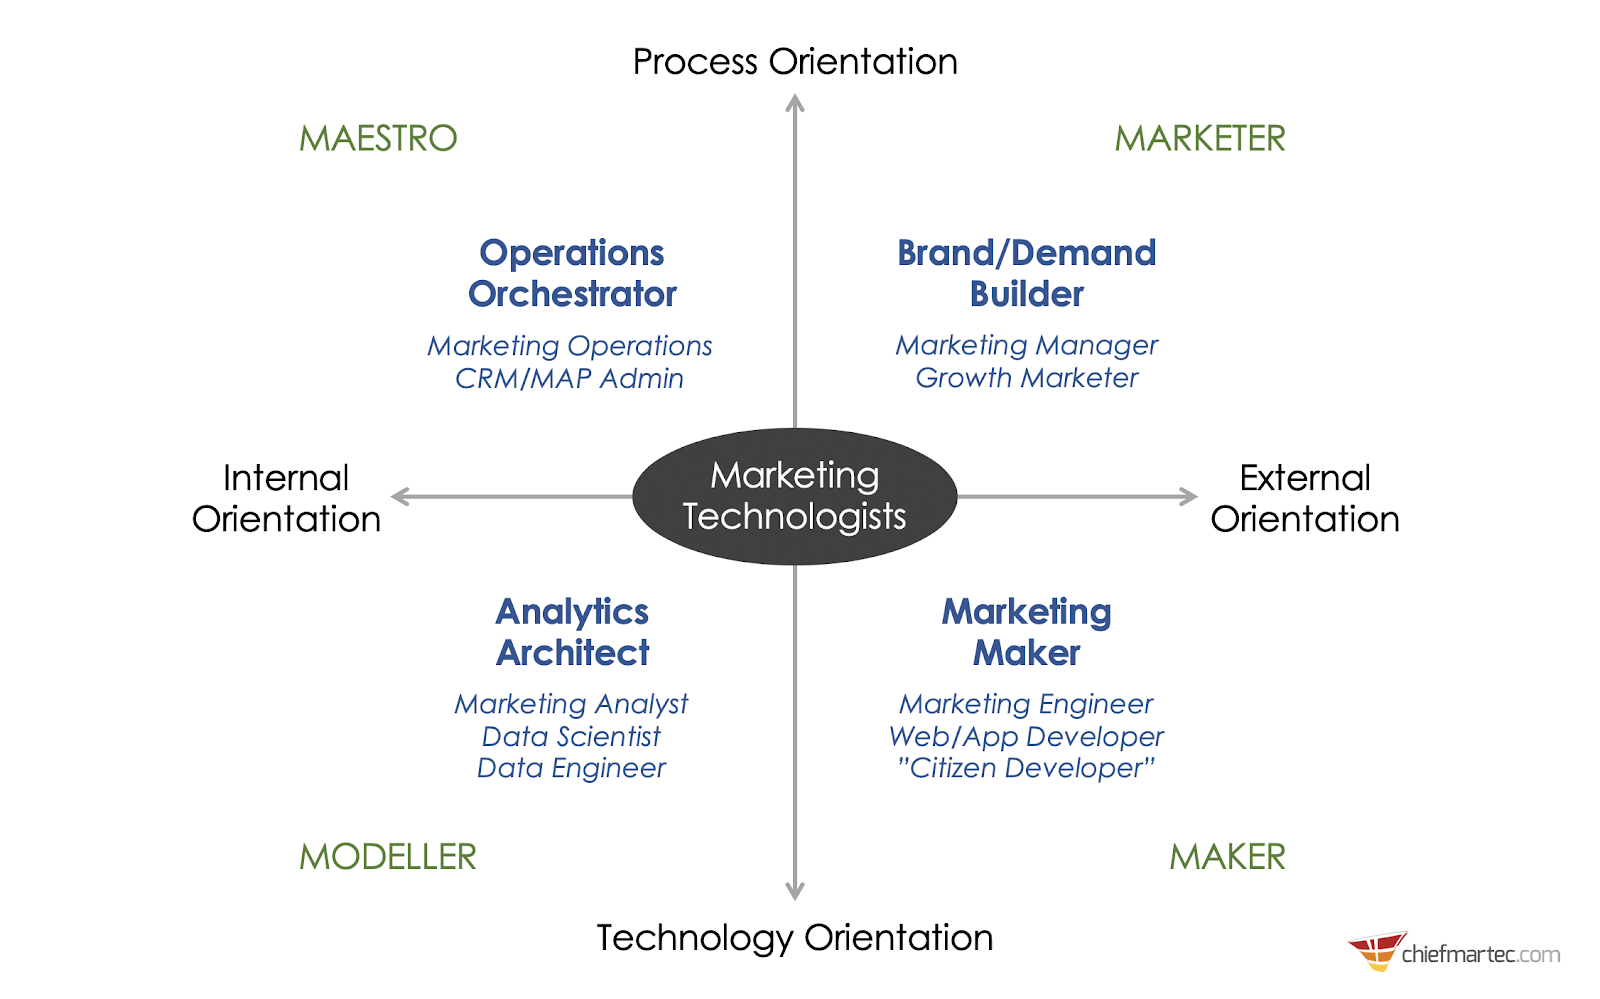 Why marketing operations leaders have become modernizers